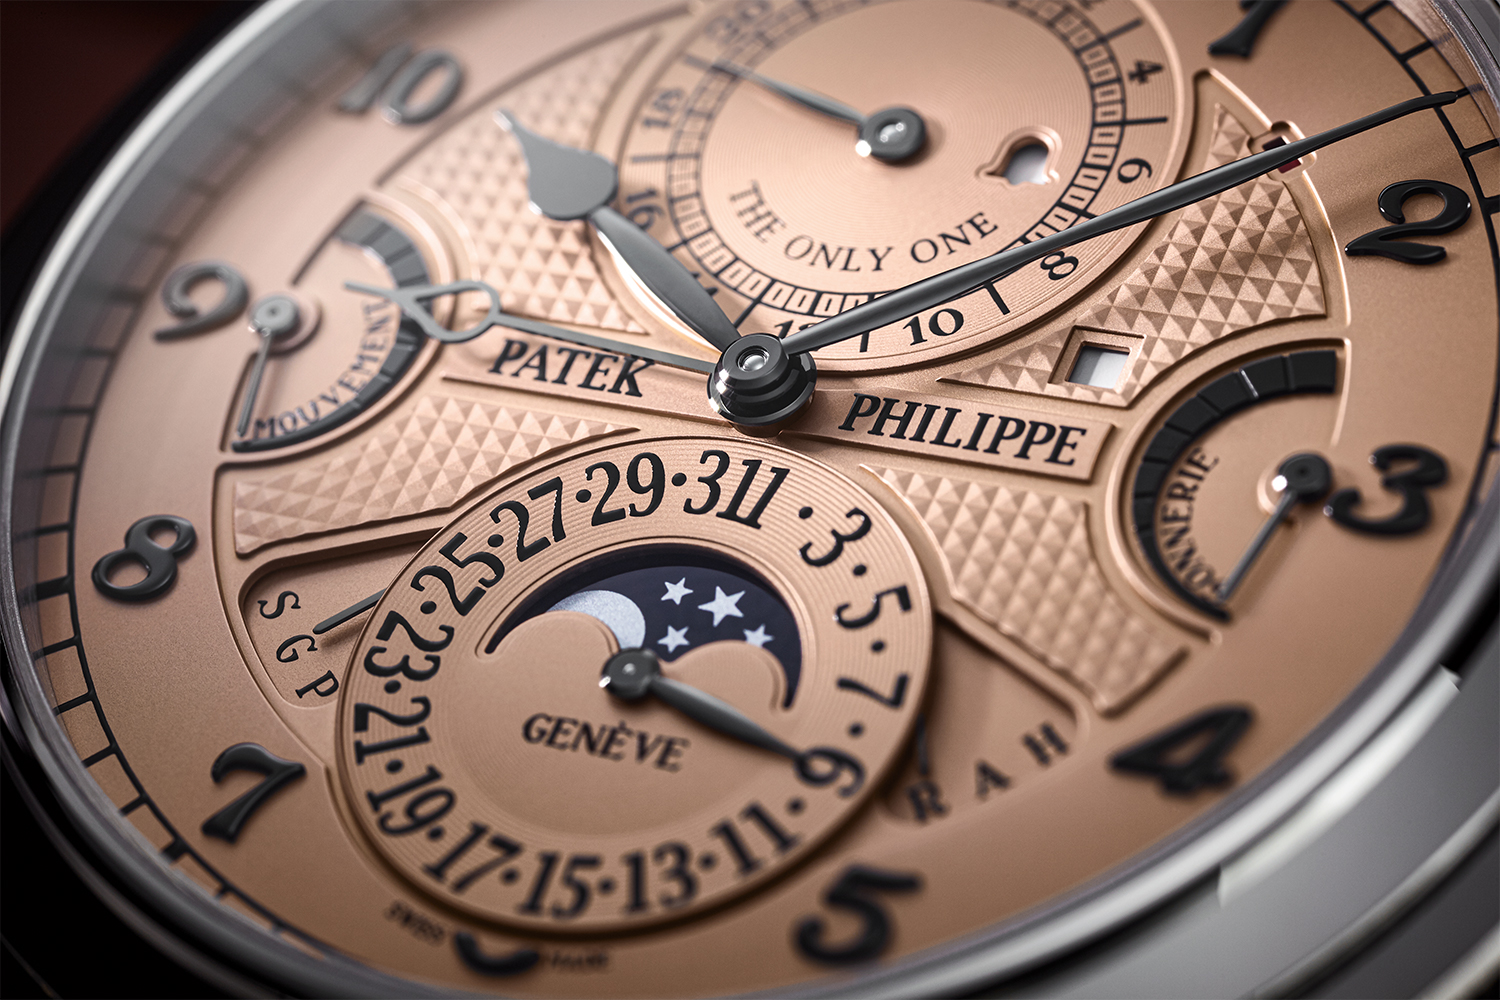 The Price Of This Most Expensive Watch in the World Will Shock You